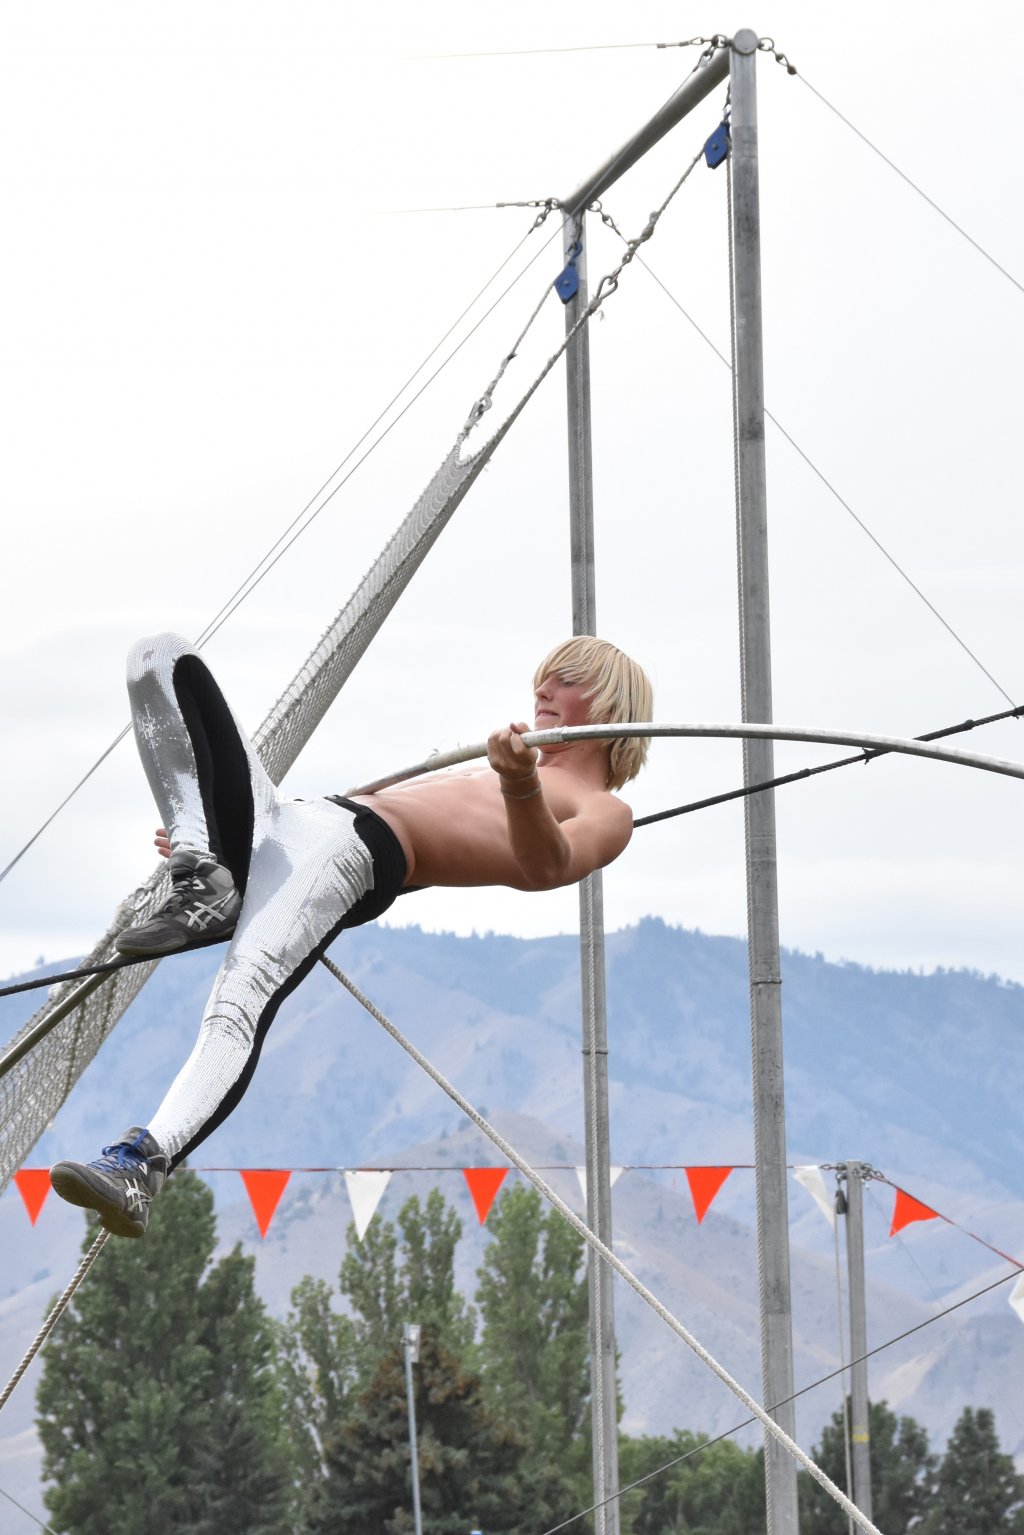 image-867022-Andrew_Laying_on_Incline_Wire_2019-45c48.w640.jpg